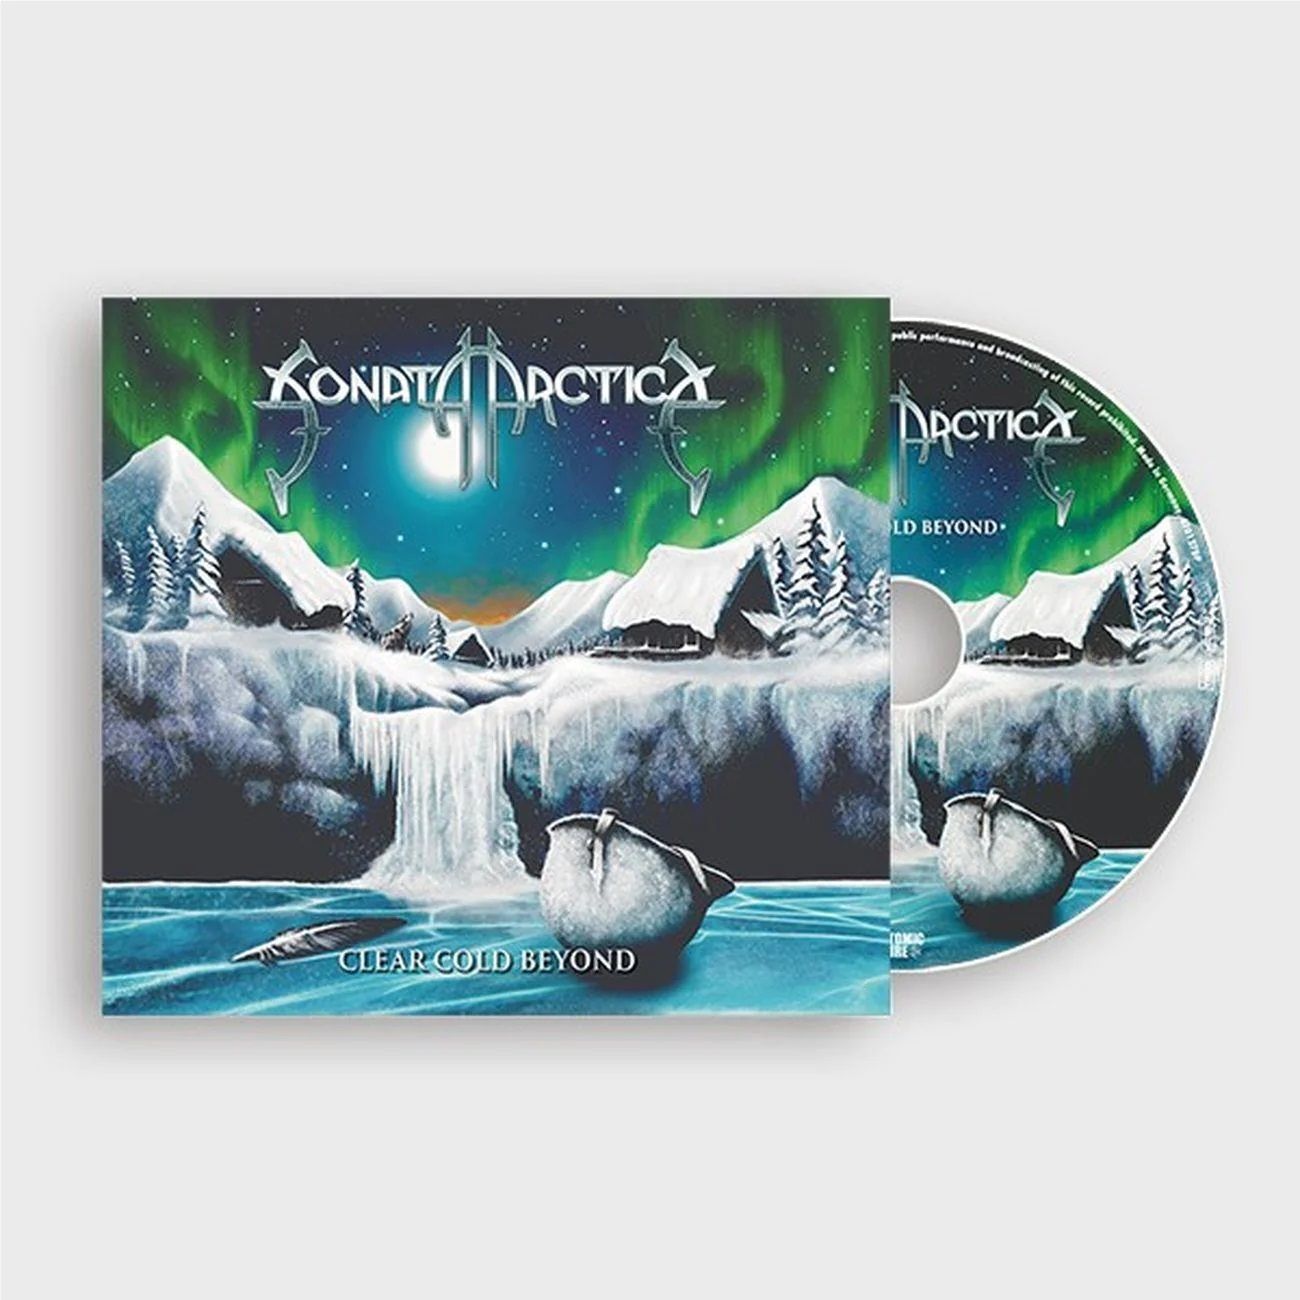 Sonata Arctica - Clear Cold Beyond - CD - New